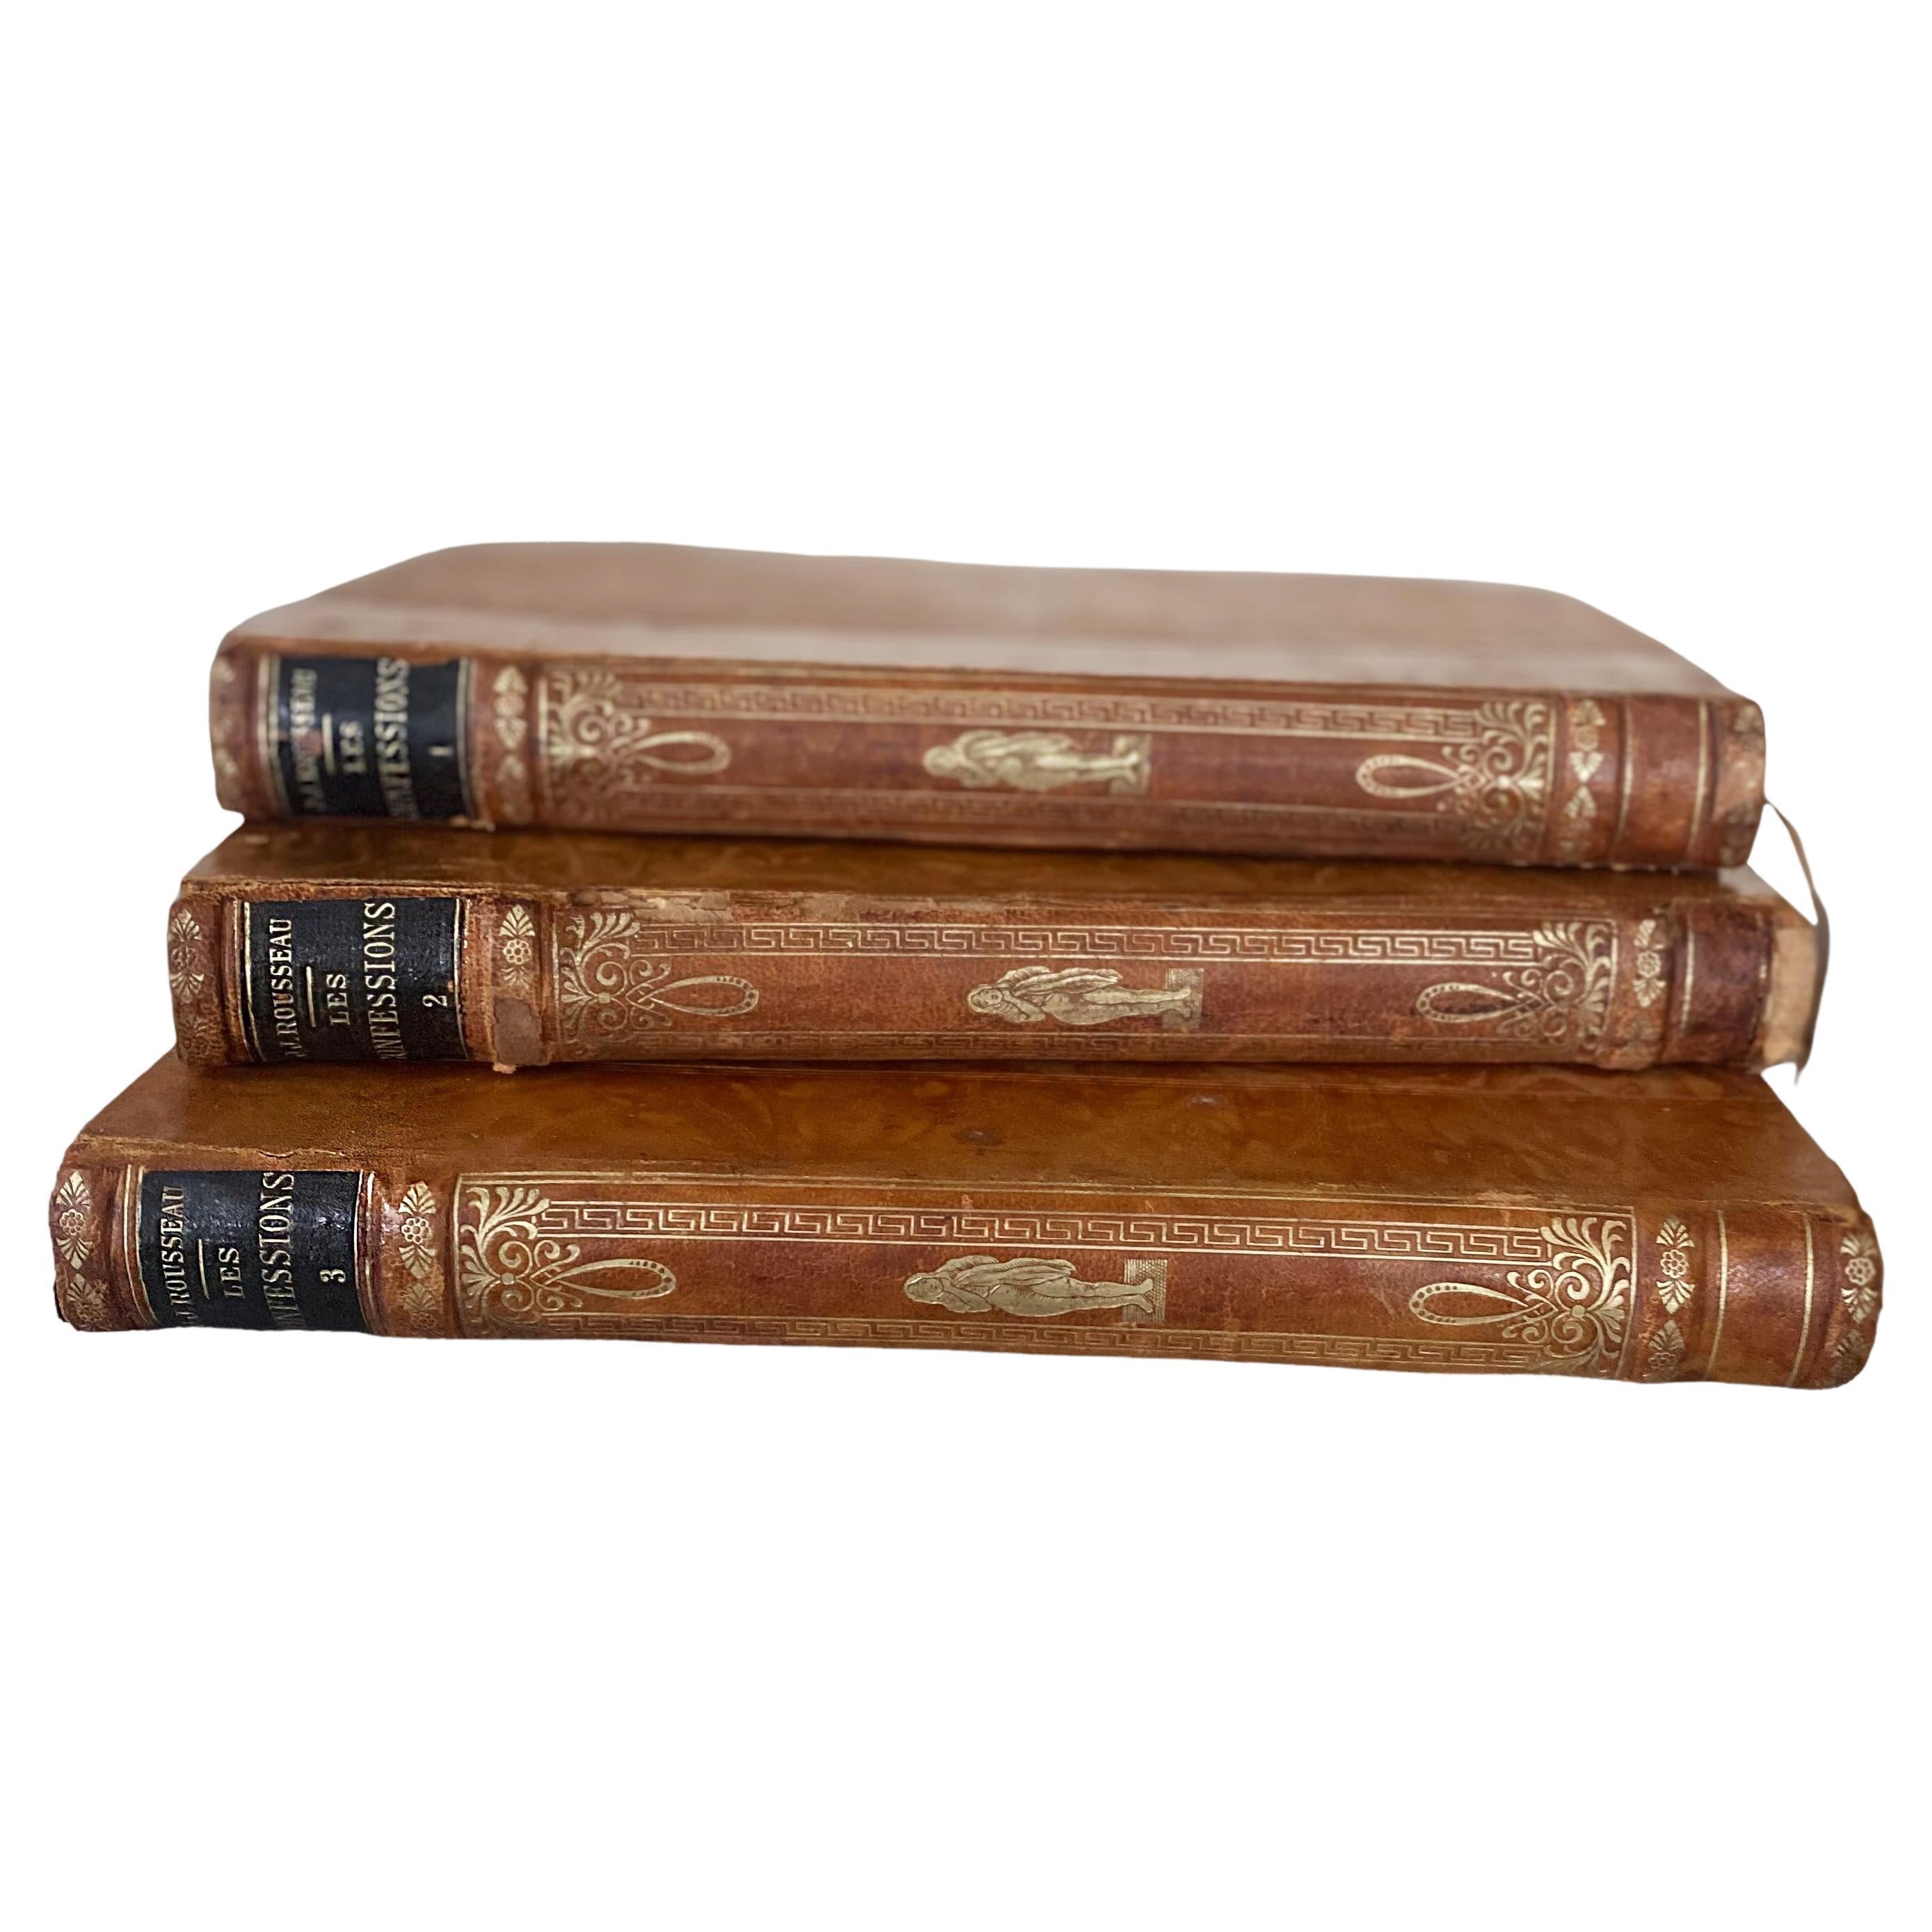 Les Confessions French Antique Books by J-J ROUSSEAU Leather Bound 3 Volumes  For Sale